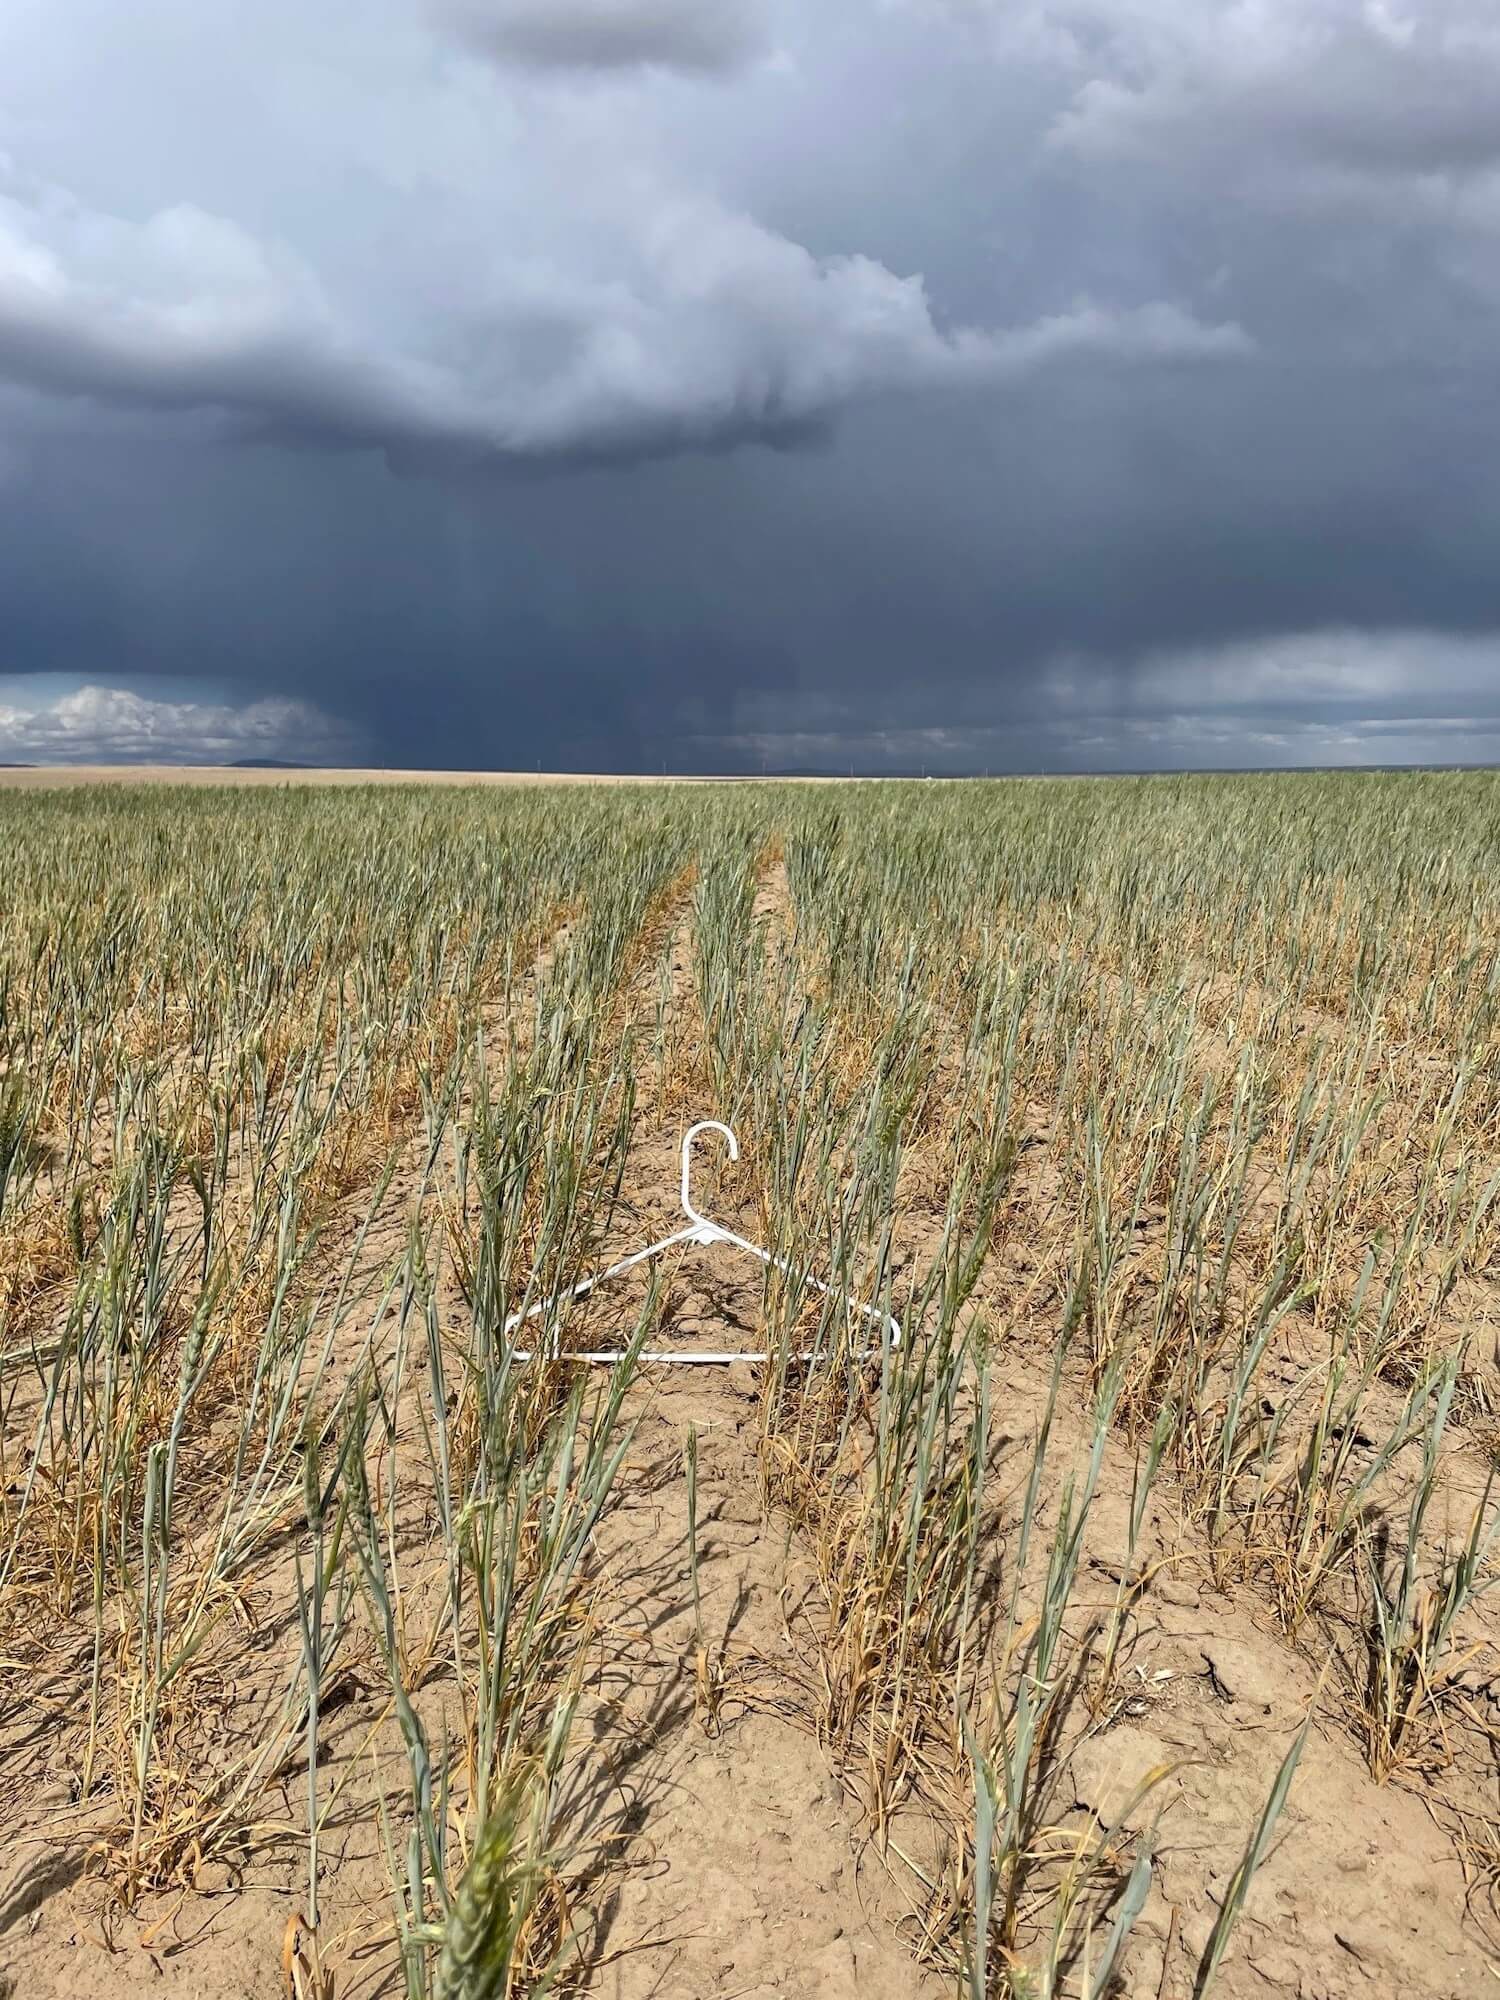 The drought-damaged wheat crop on Nicole Berg’s farm in Paterson, Washington. July 2021